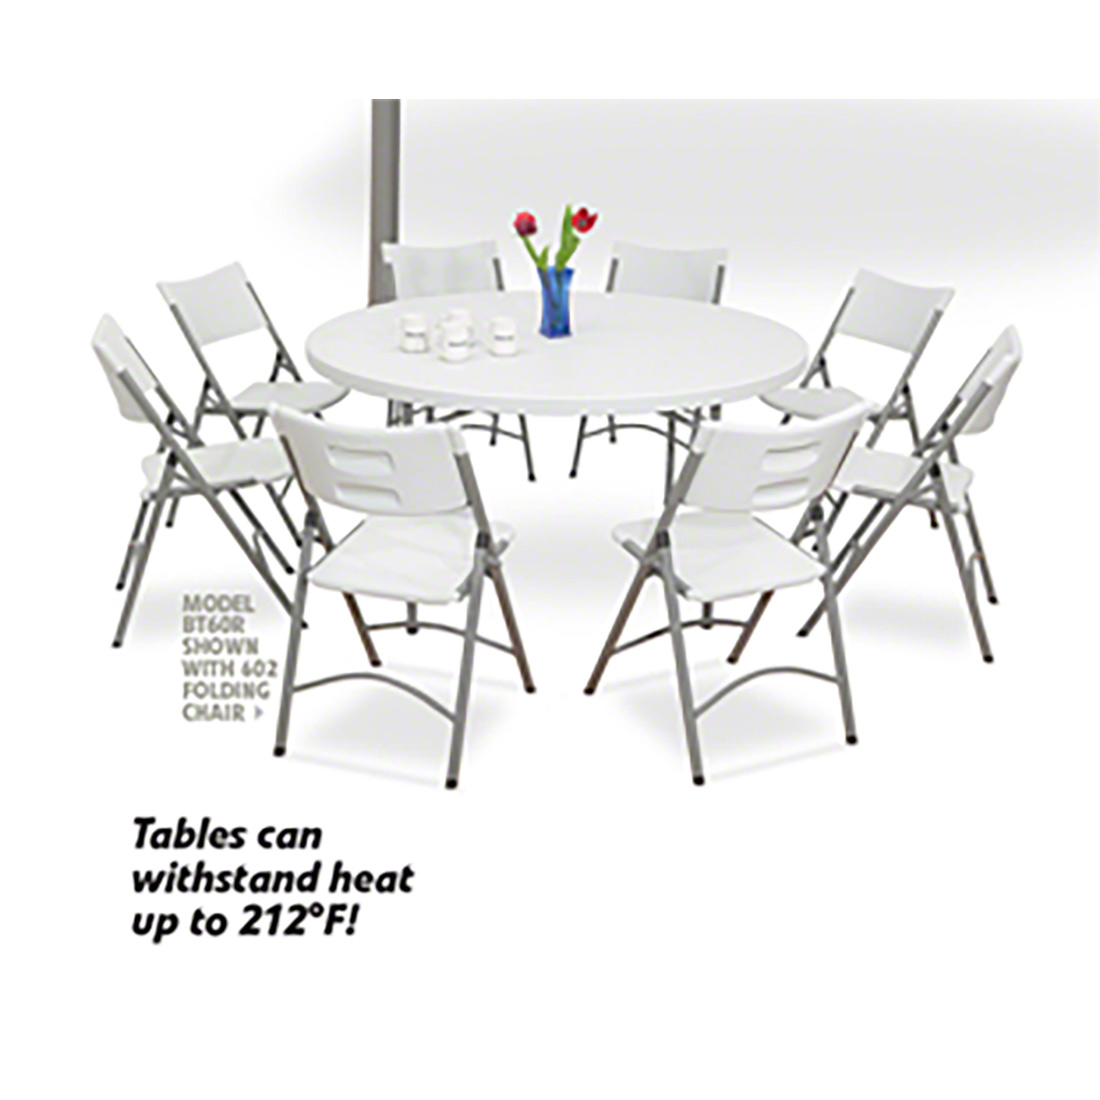 Nps 60 Round Folding Table Chairs, Round Folding Tables That Seat 8